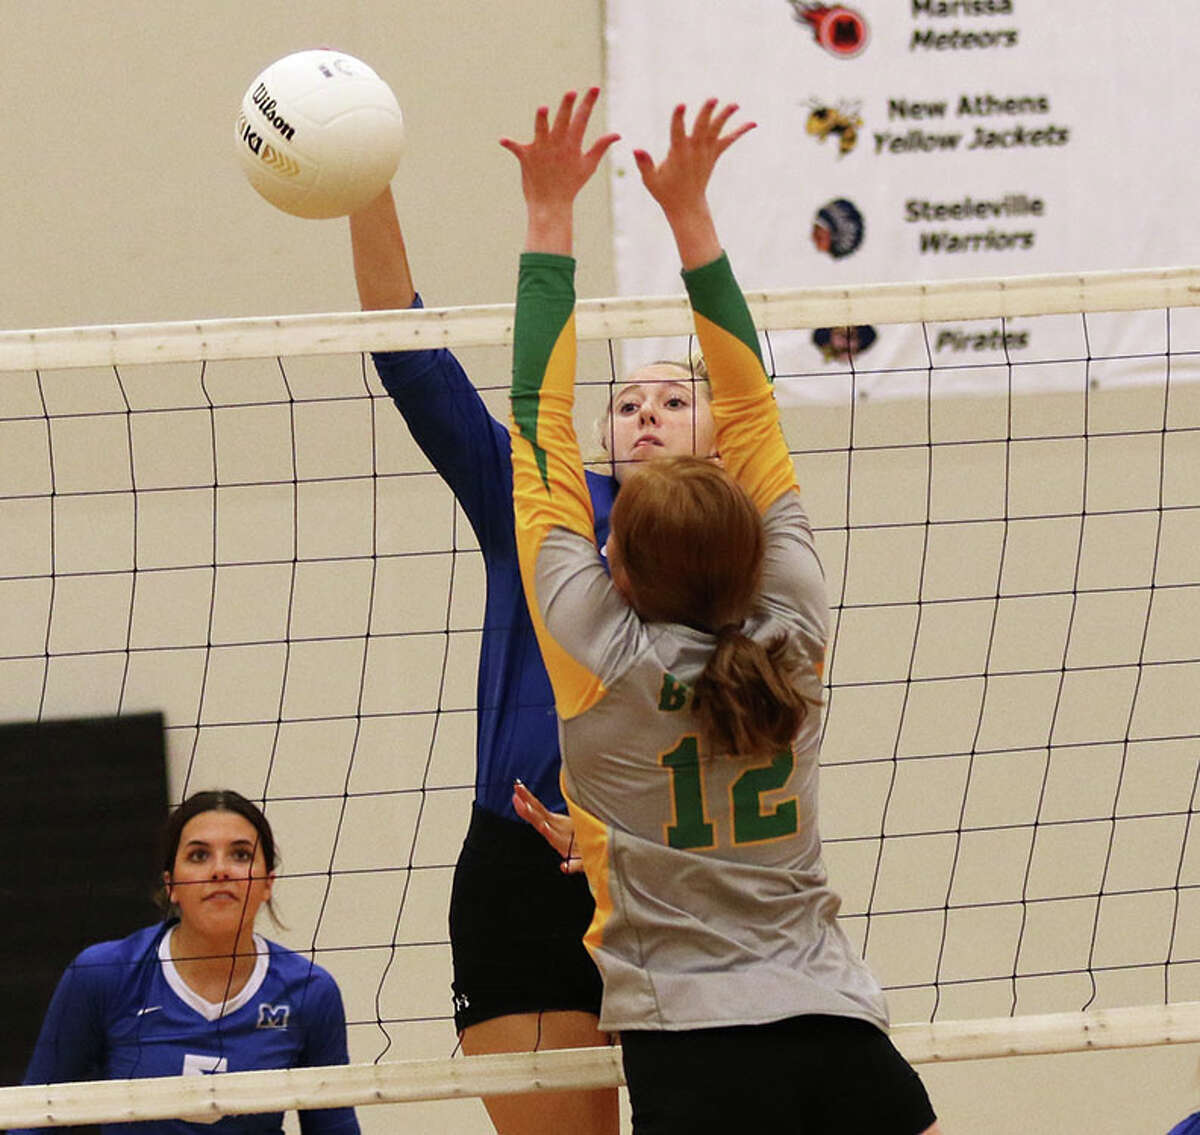 Marquette's Kylie Murray attacks against the block by Southwestern's Abigail Hellrung (12) in a semifinal match Monday night at the Wesclin Class 2A Regional at Trenton.